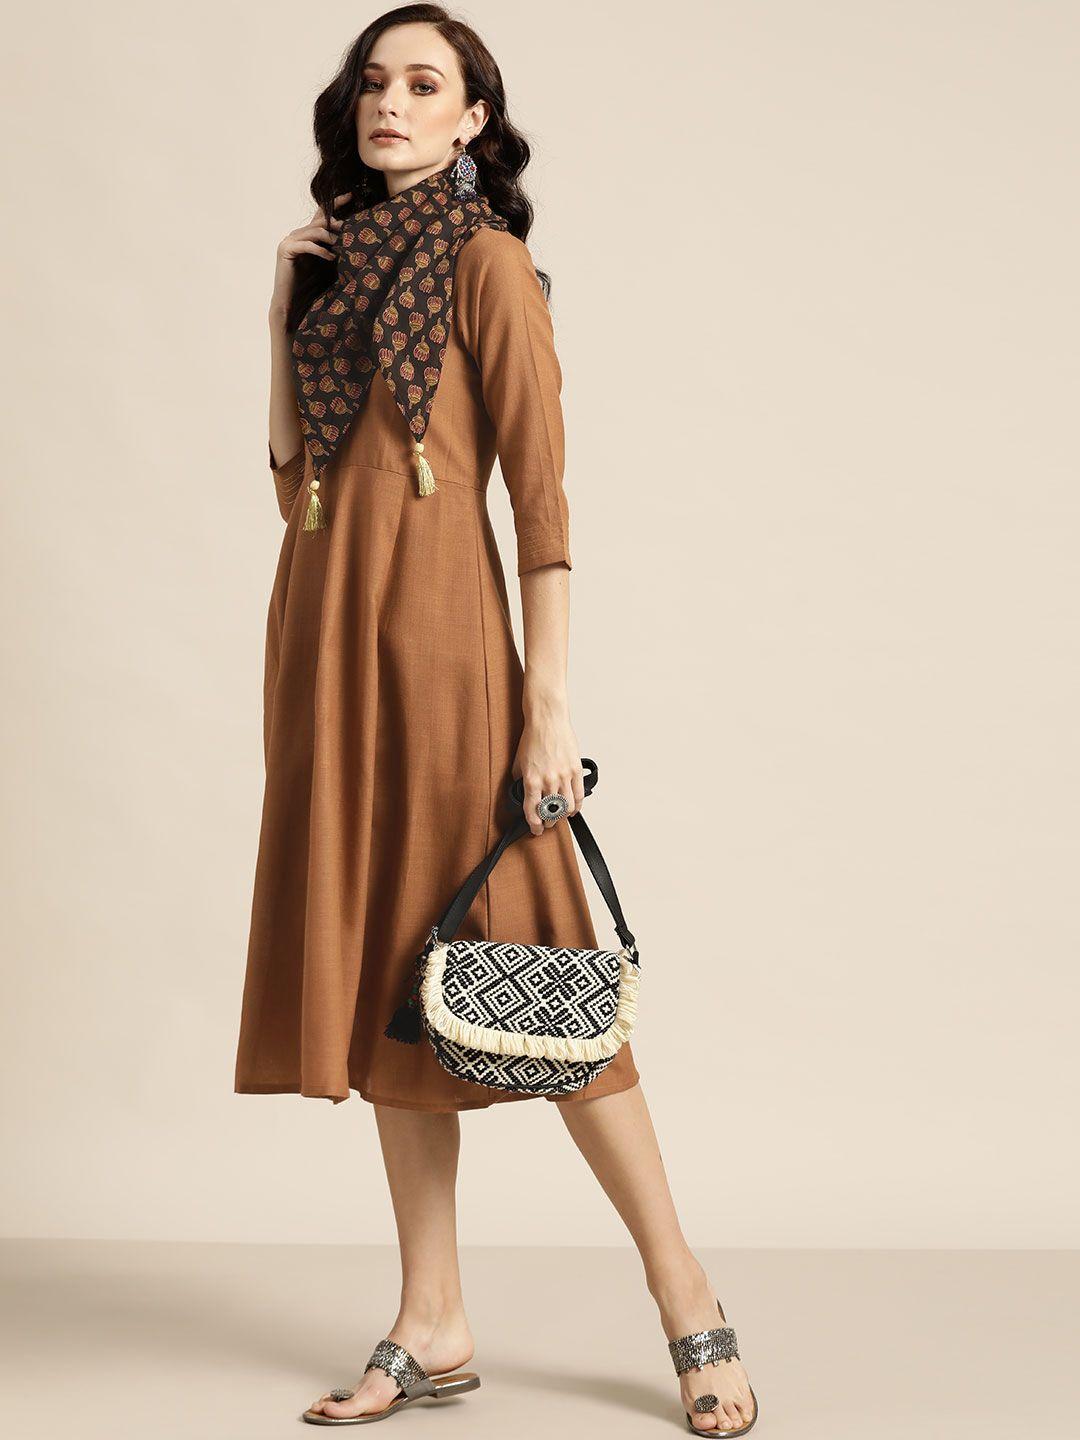 shae by sassafras brown a-line dress with printed scarf